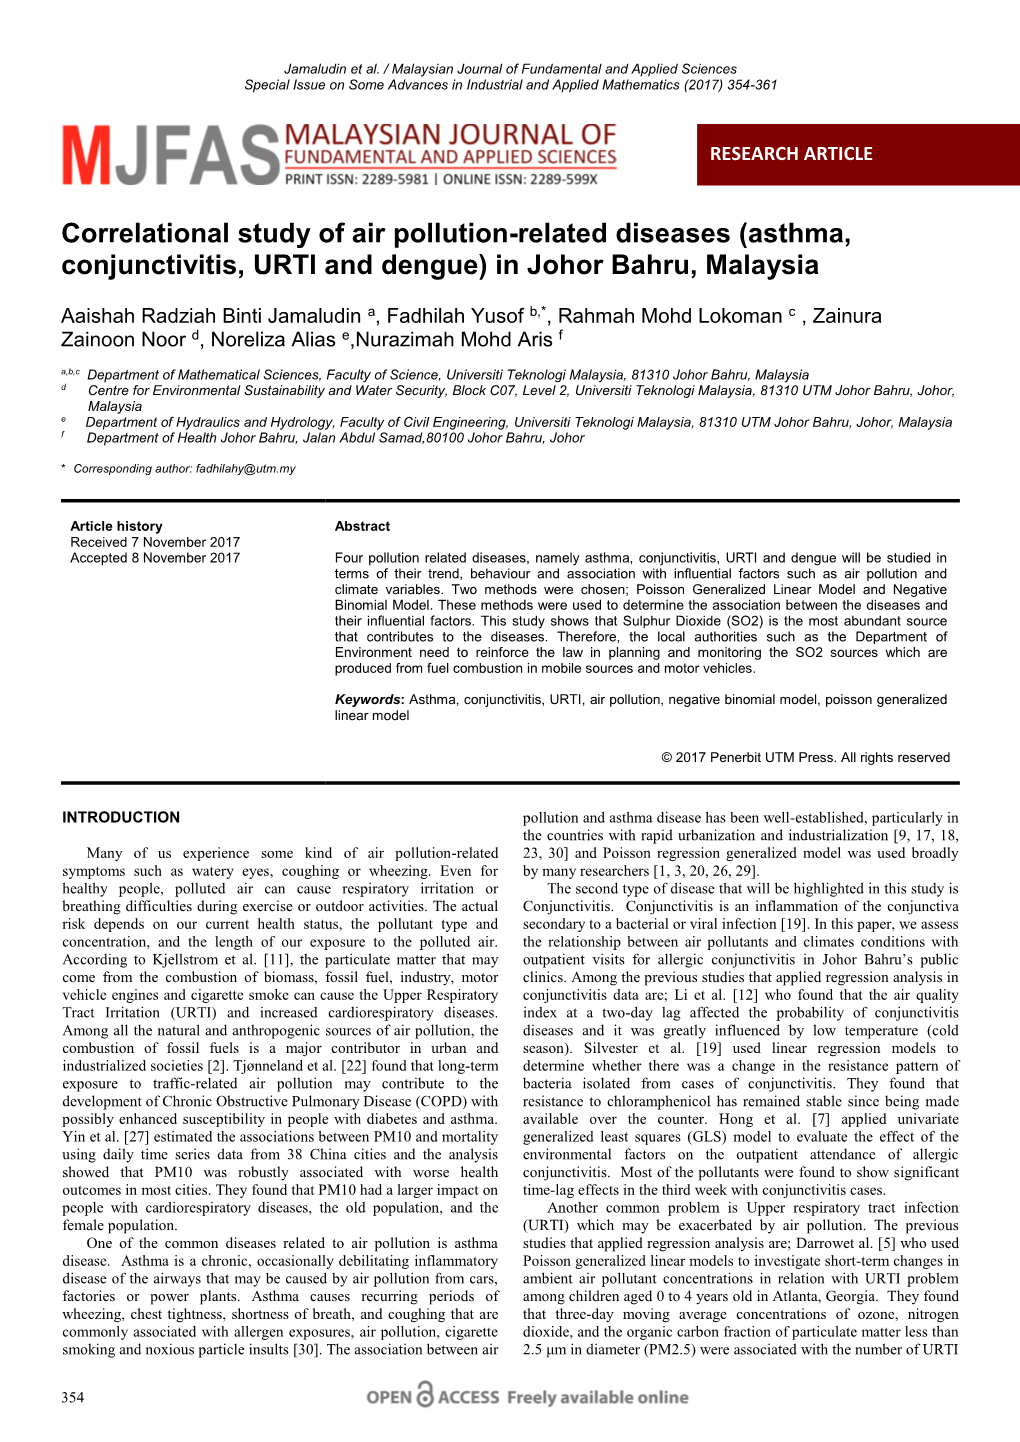 Correlational Study of Air Pollution-Related Diseases (Asthma, Conjunctivitis, URTI and Dengue) in Johor Bahru, Malaysia